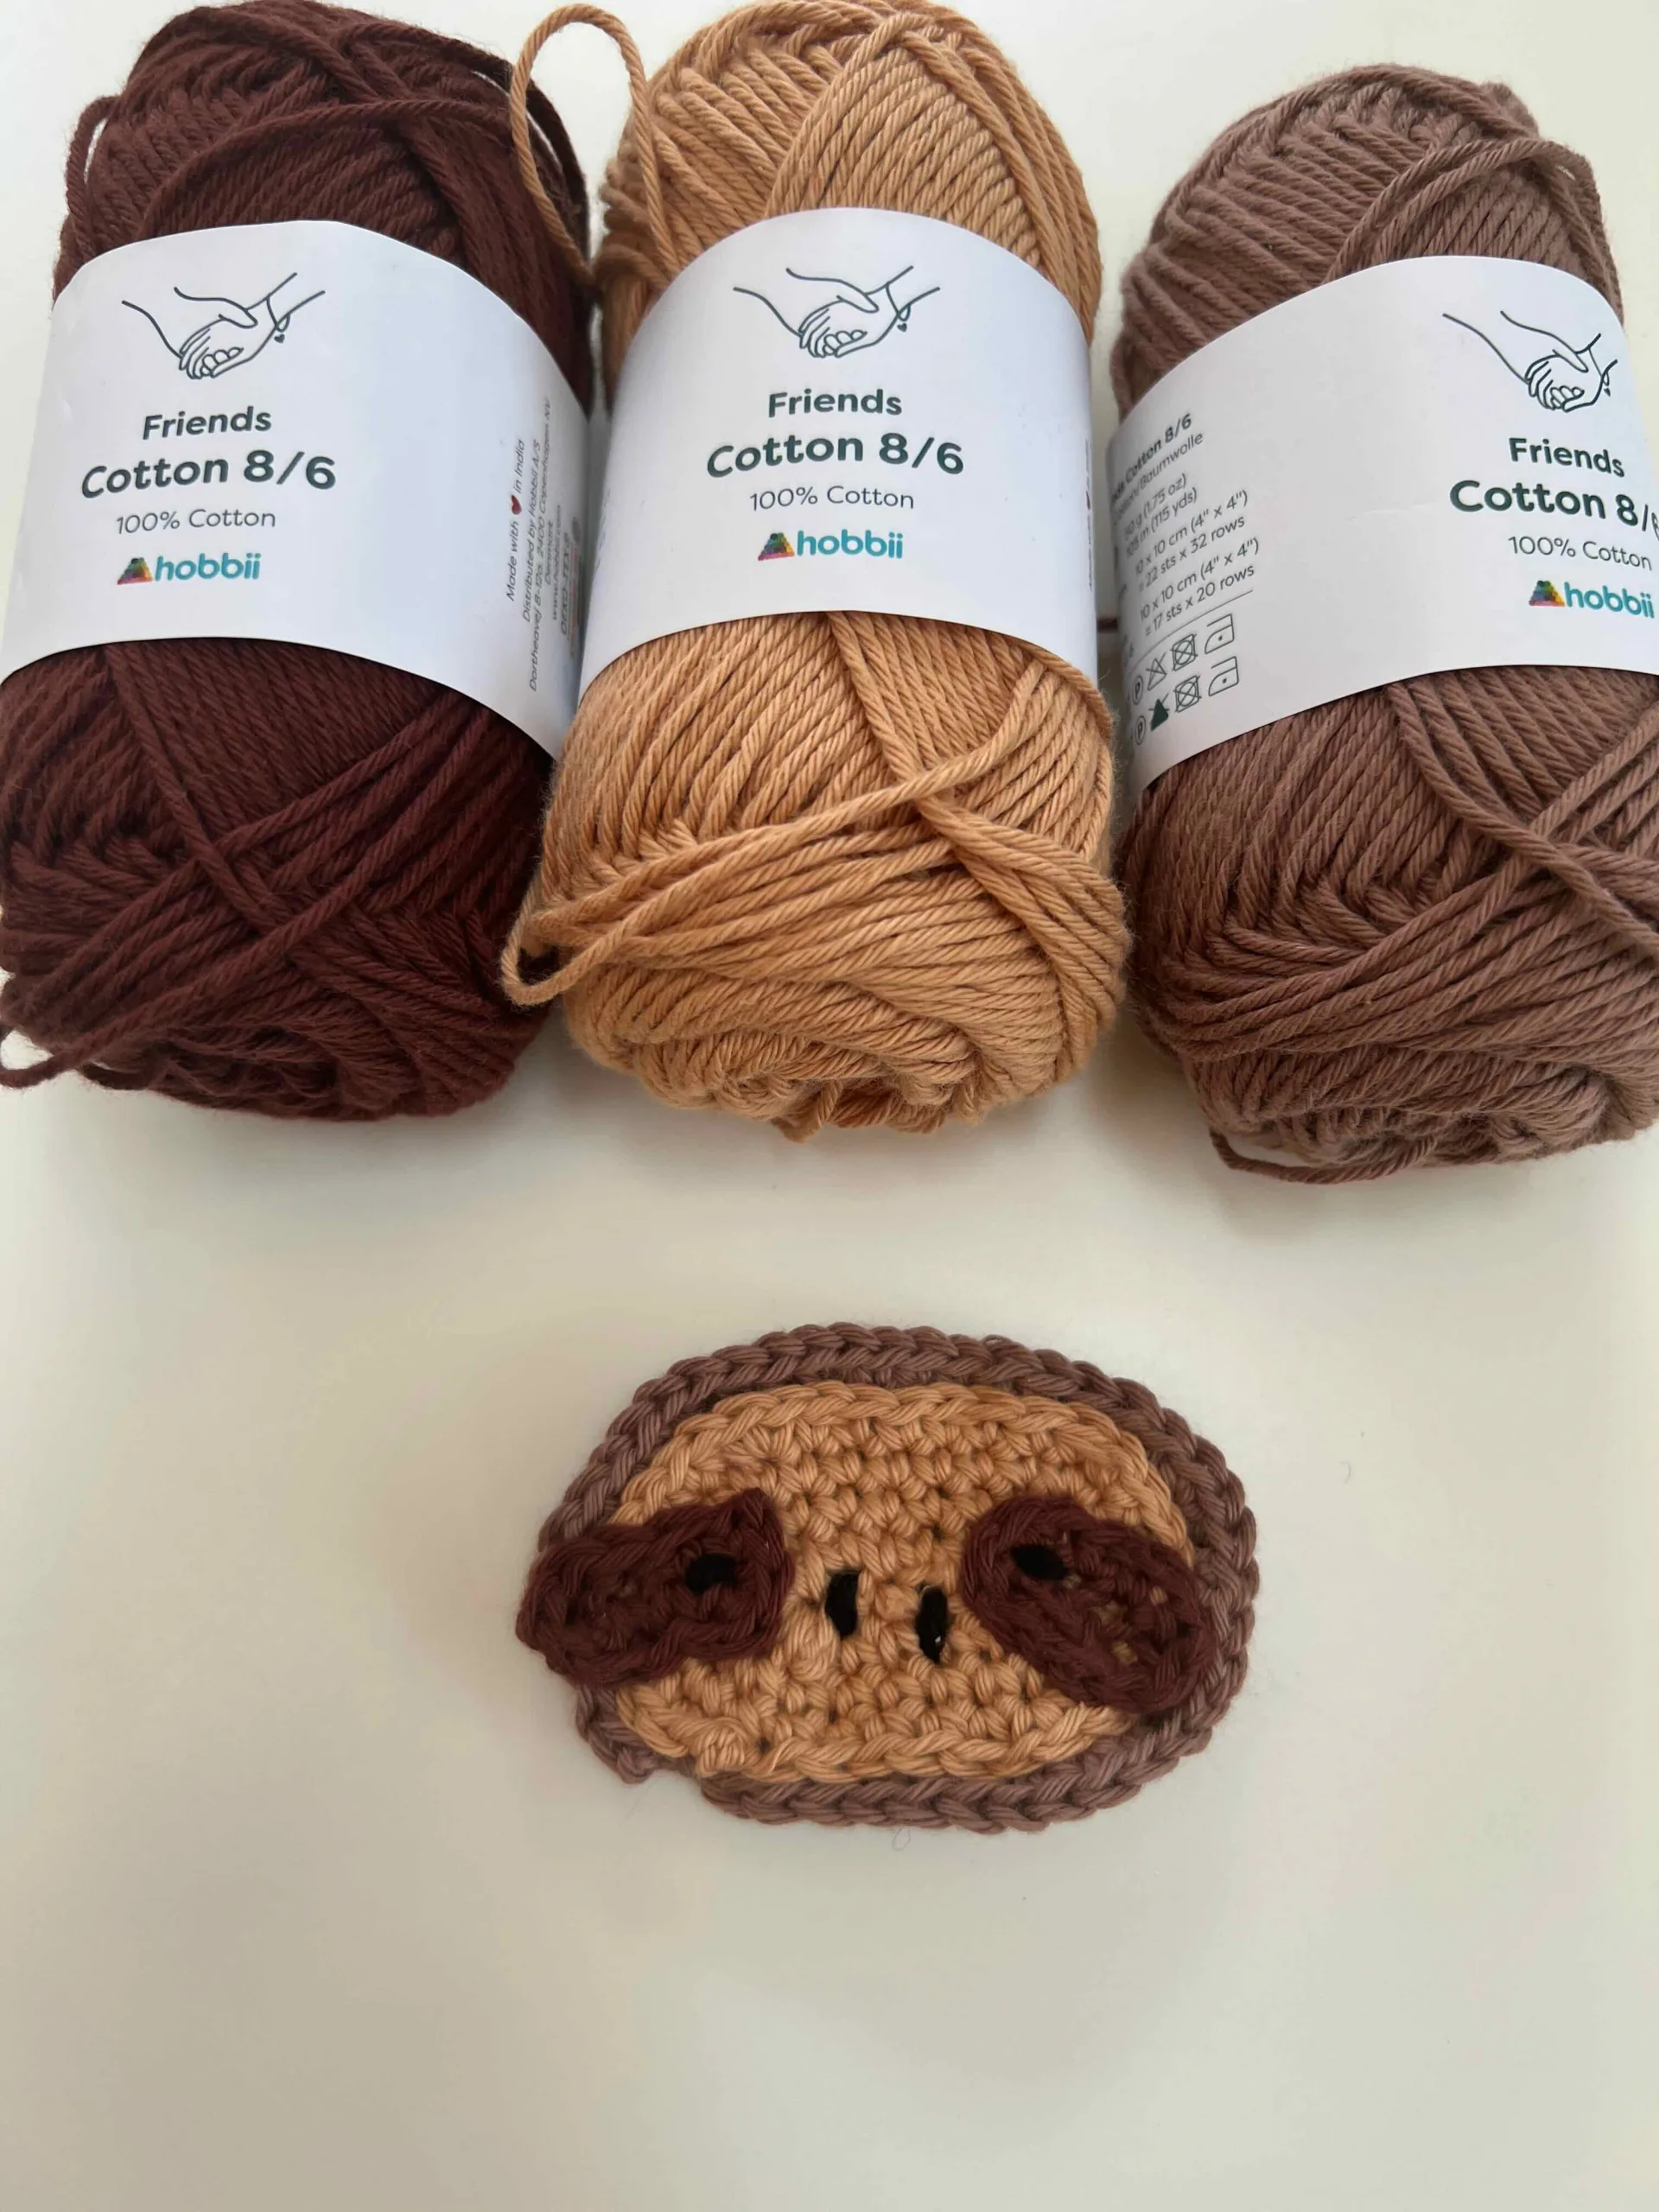 crochet sloth pattern free and easy